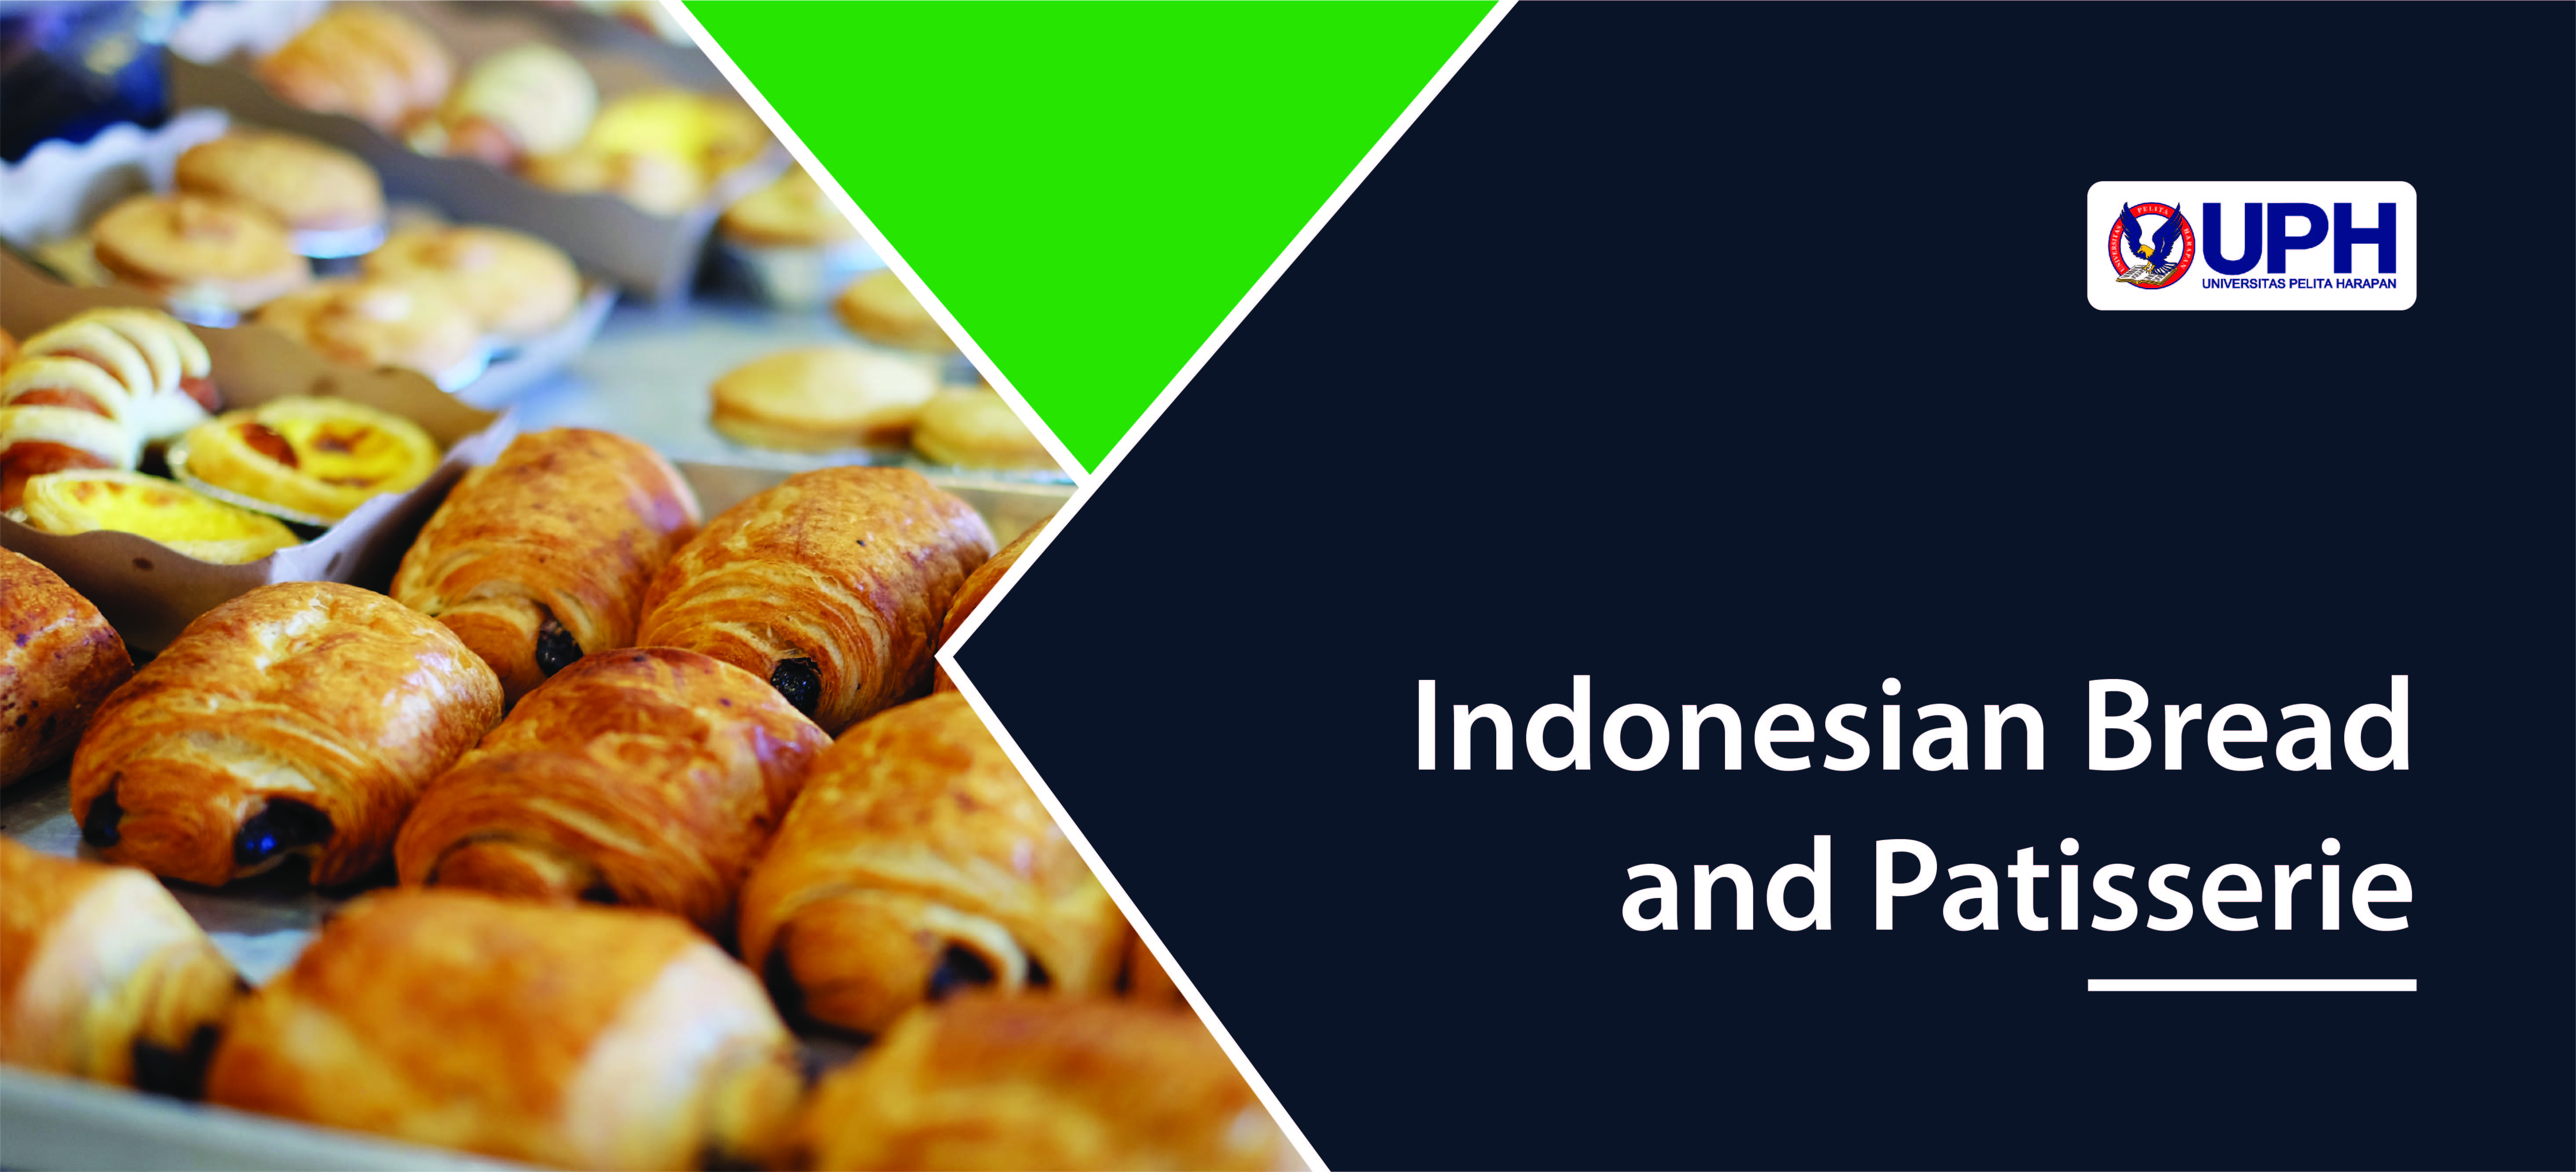 Indonesian Bread and Patisserie - HOS 4506